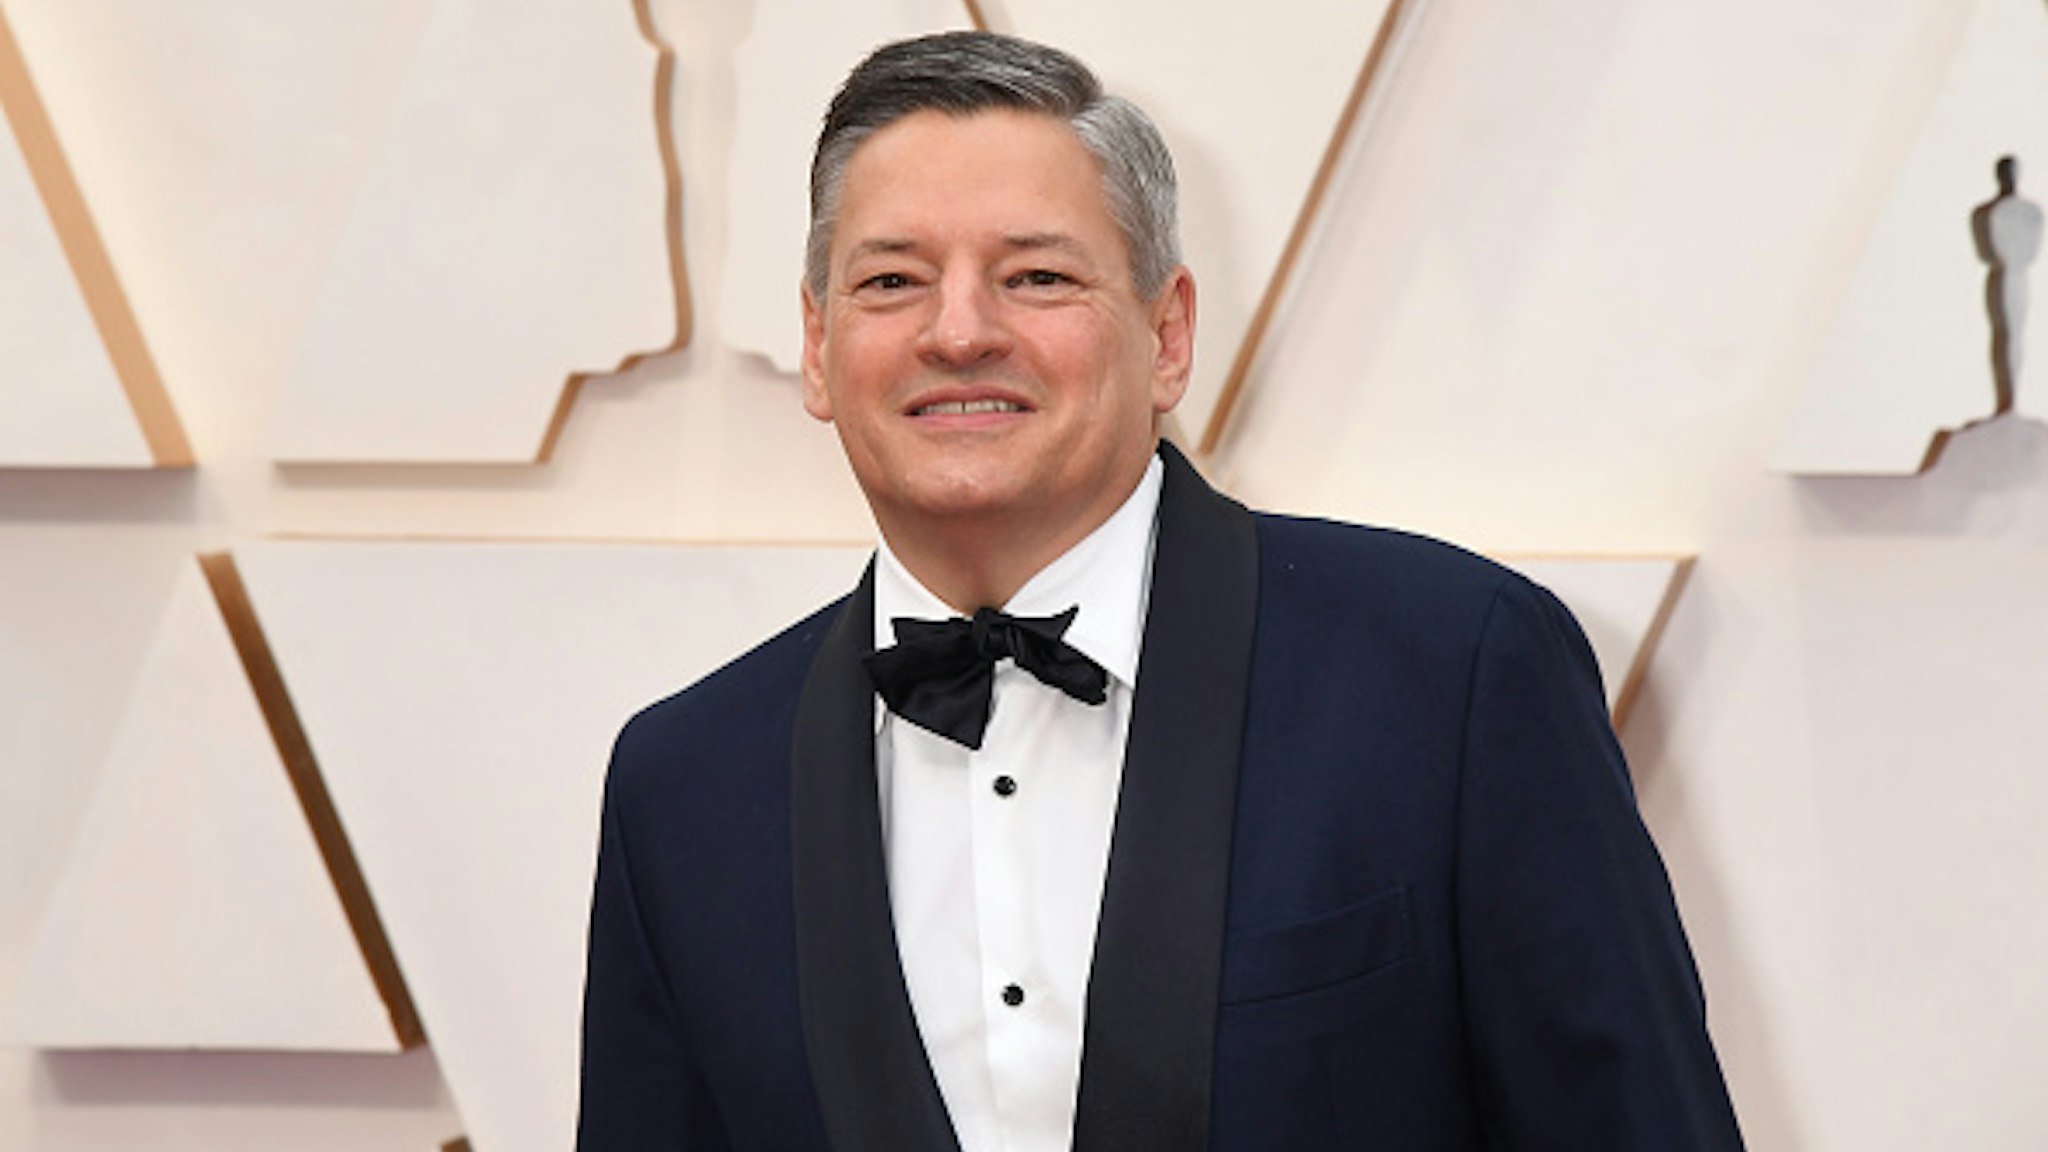 HOLLYWOOD, CALIFORNIA - FEBRUARY 09: Netflix CCO Ted Sarandos attends the 92nd Annual Academy Awards at Hollywood and Highland on February 09, 2020 in Hollywood, California.